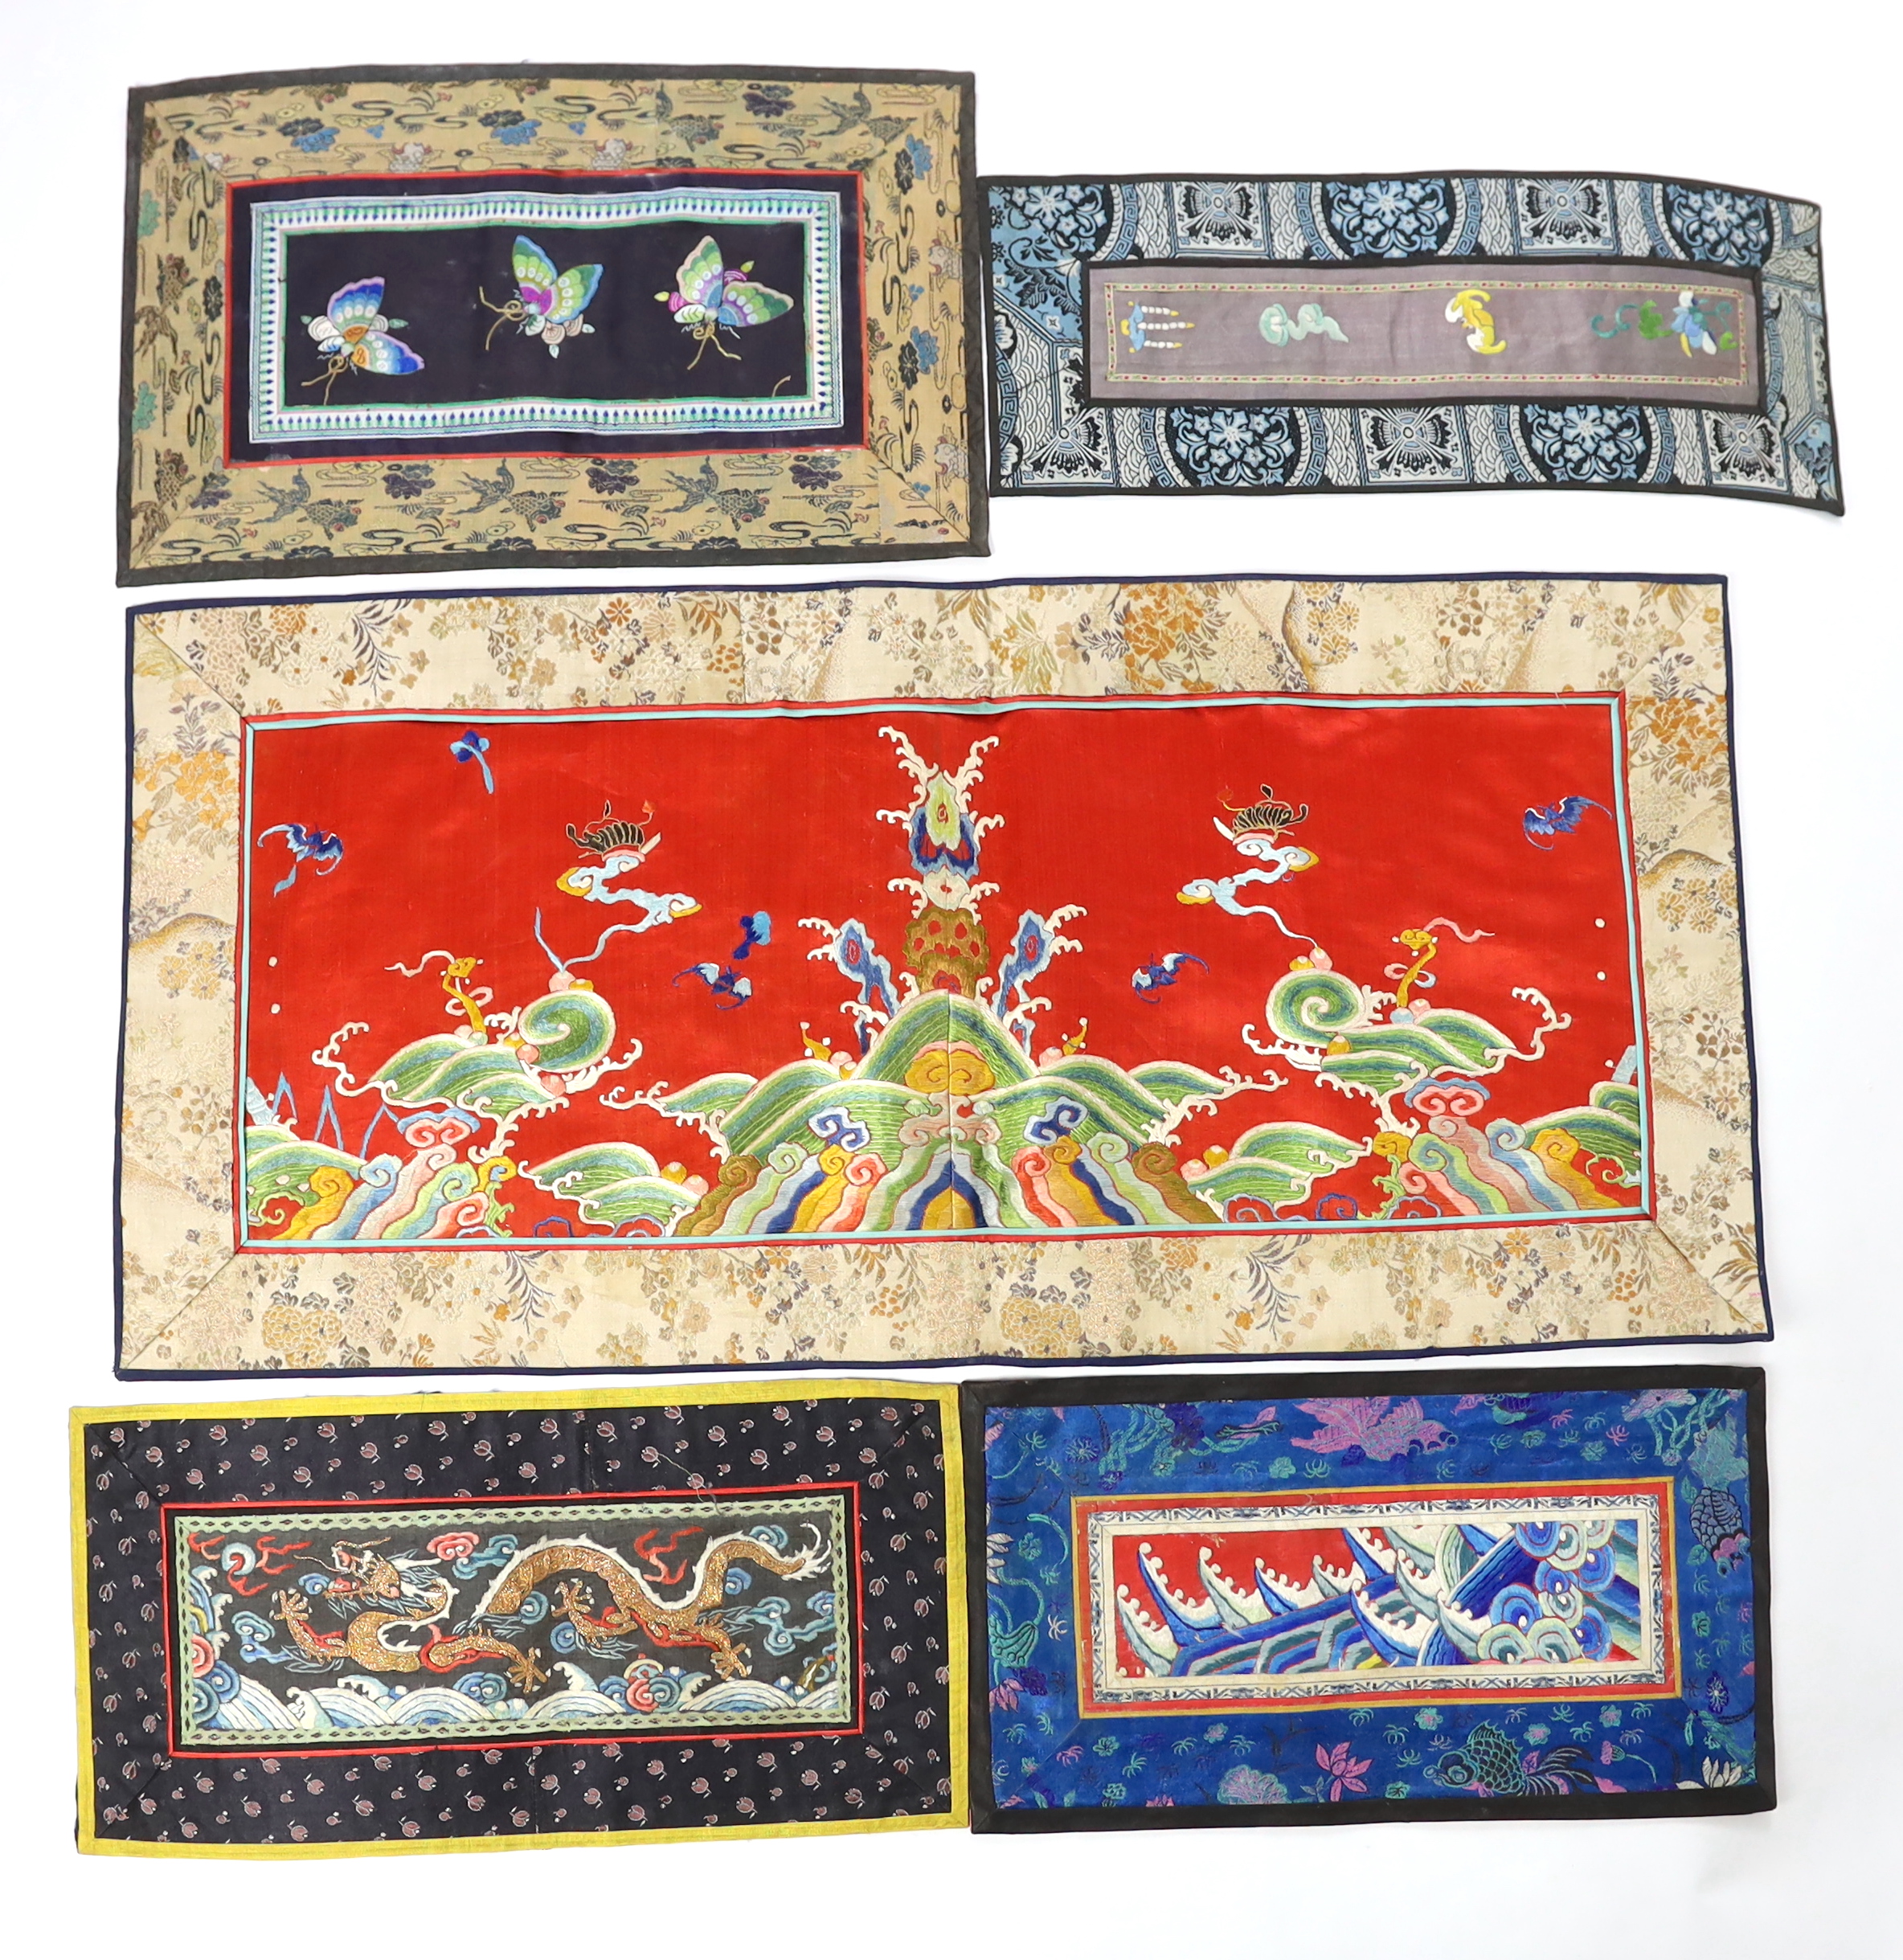 A Chinese late Qing dynasty red silk and polychrome embroidered lishui wave and flaming pearl panel, another smaller metallic dragon panel, an ornate butterfly panel and two other smaller embroidered panels with auspicio